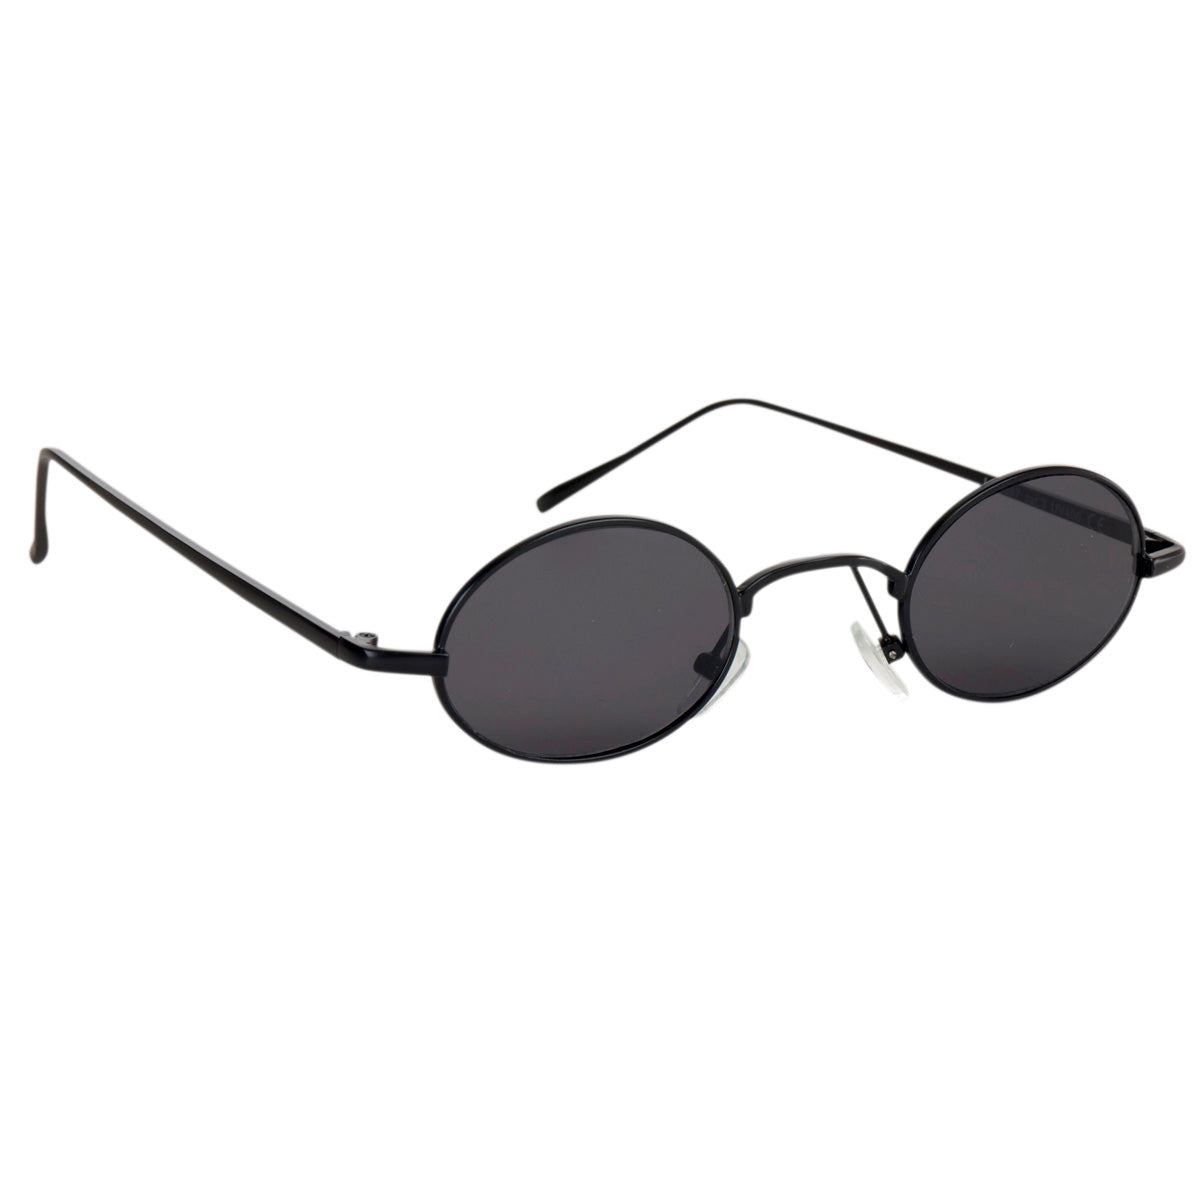 Oval for small sunglasses